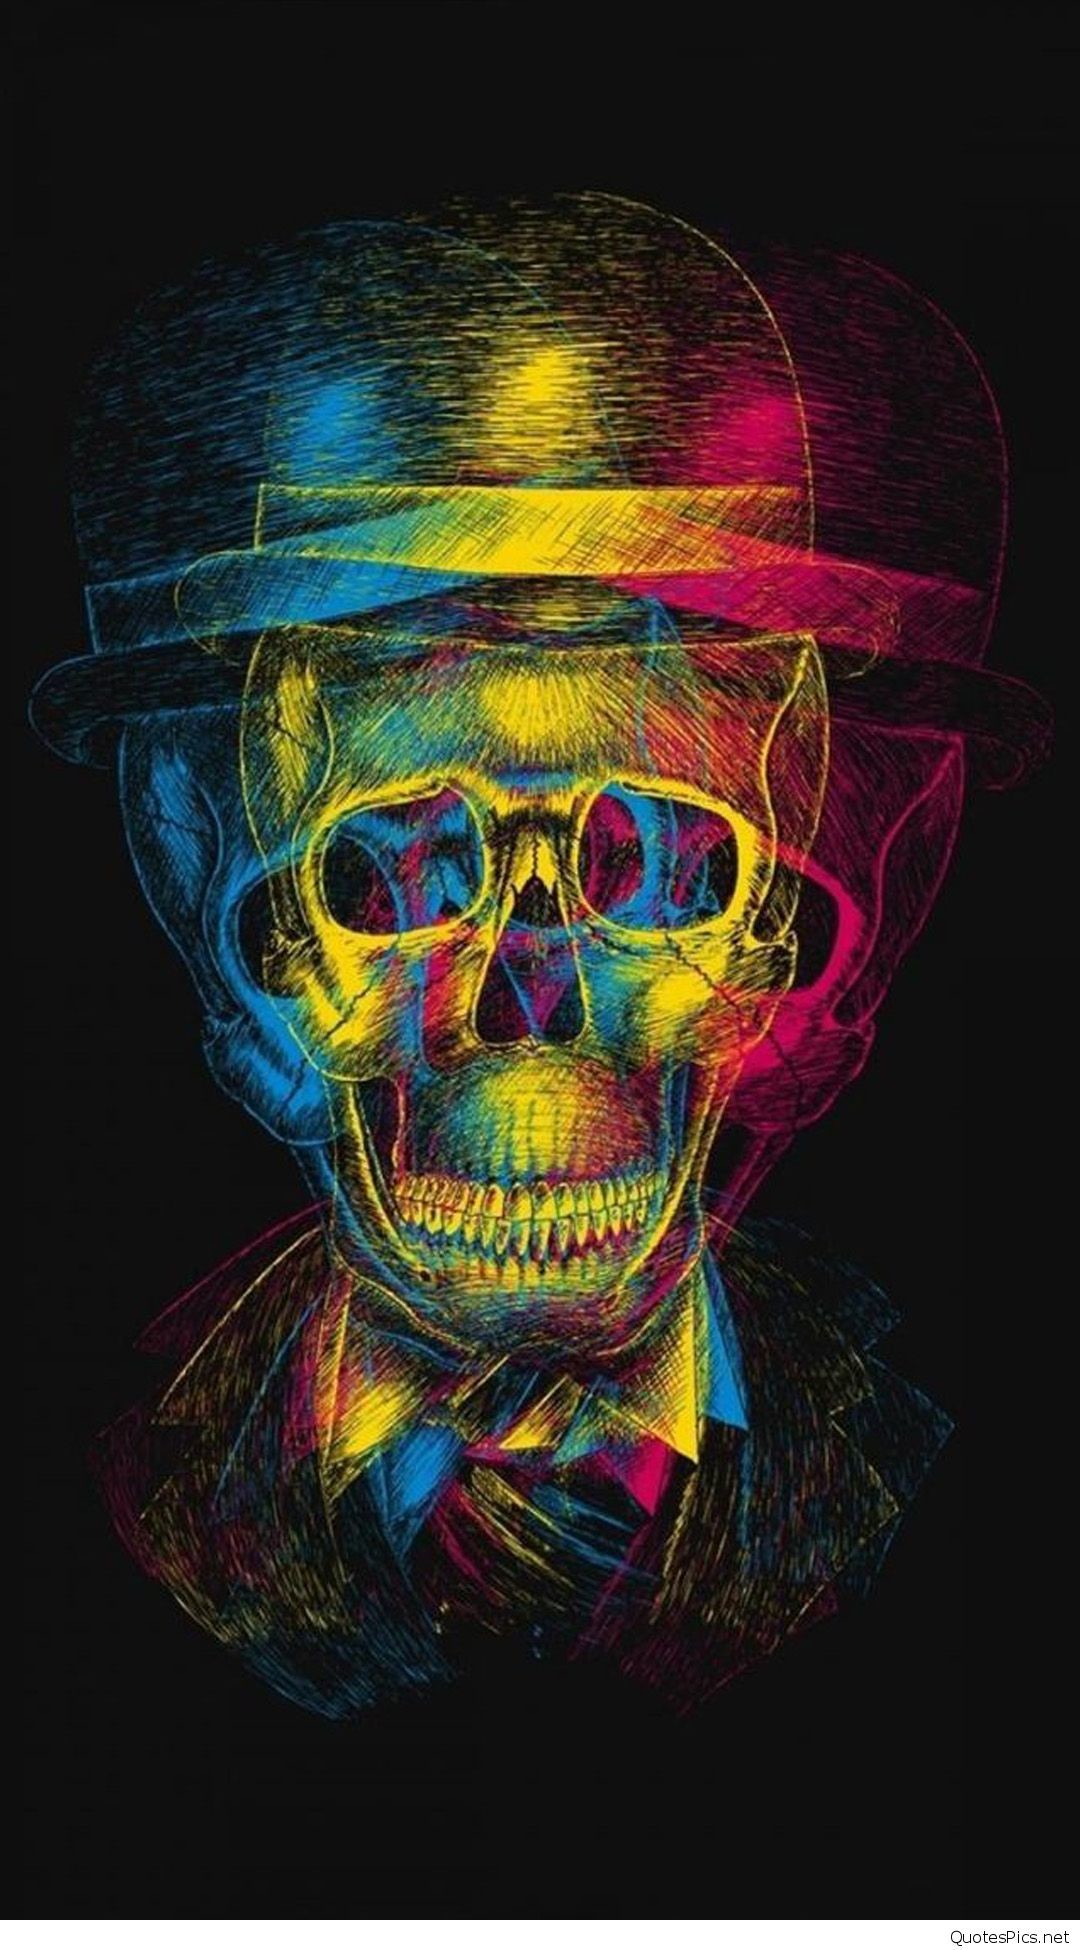 1080x1950 Colorful-Overlapping-Skull--Art-iPhone-6-plus-wallpaper